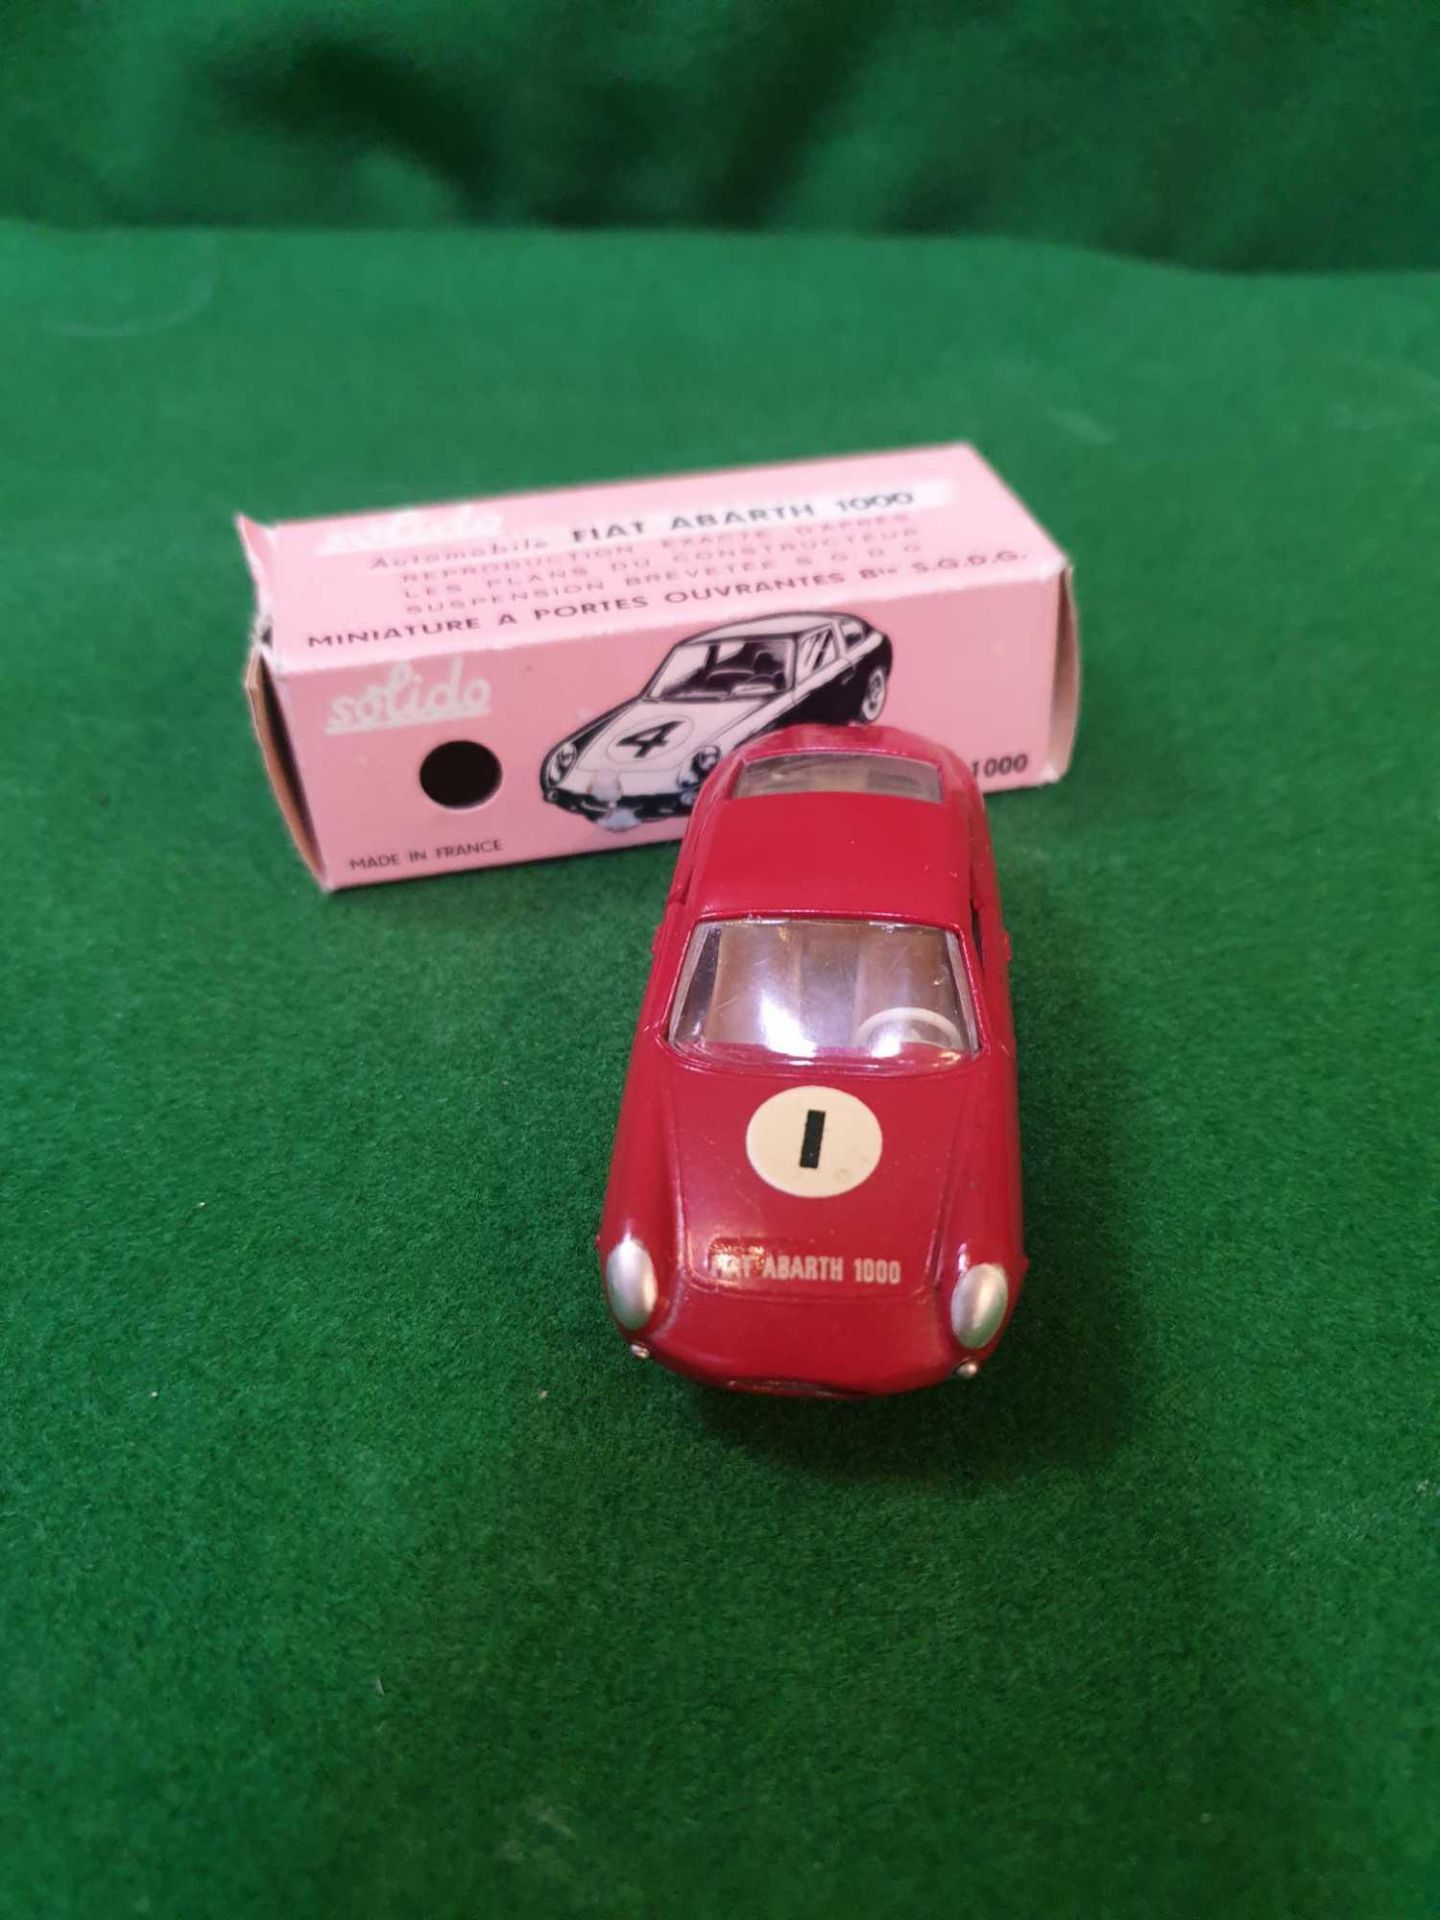 Solido #124 - Fiat Abarth 1000 - Red Racing No.1 Pink Box Mint Model In Excellent Box - Image 3 of 3